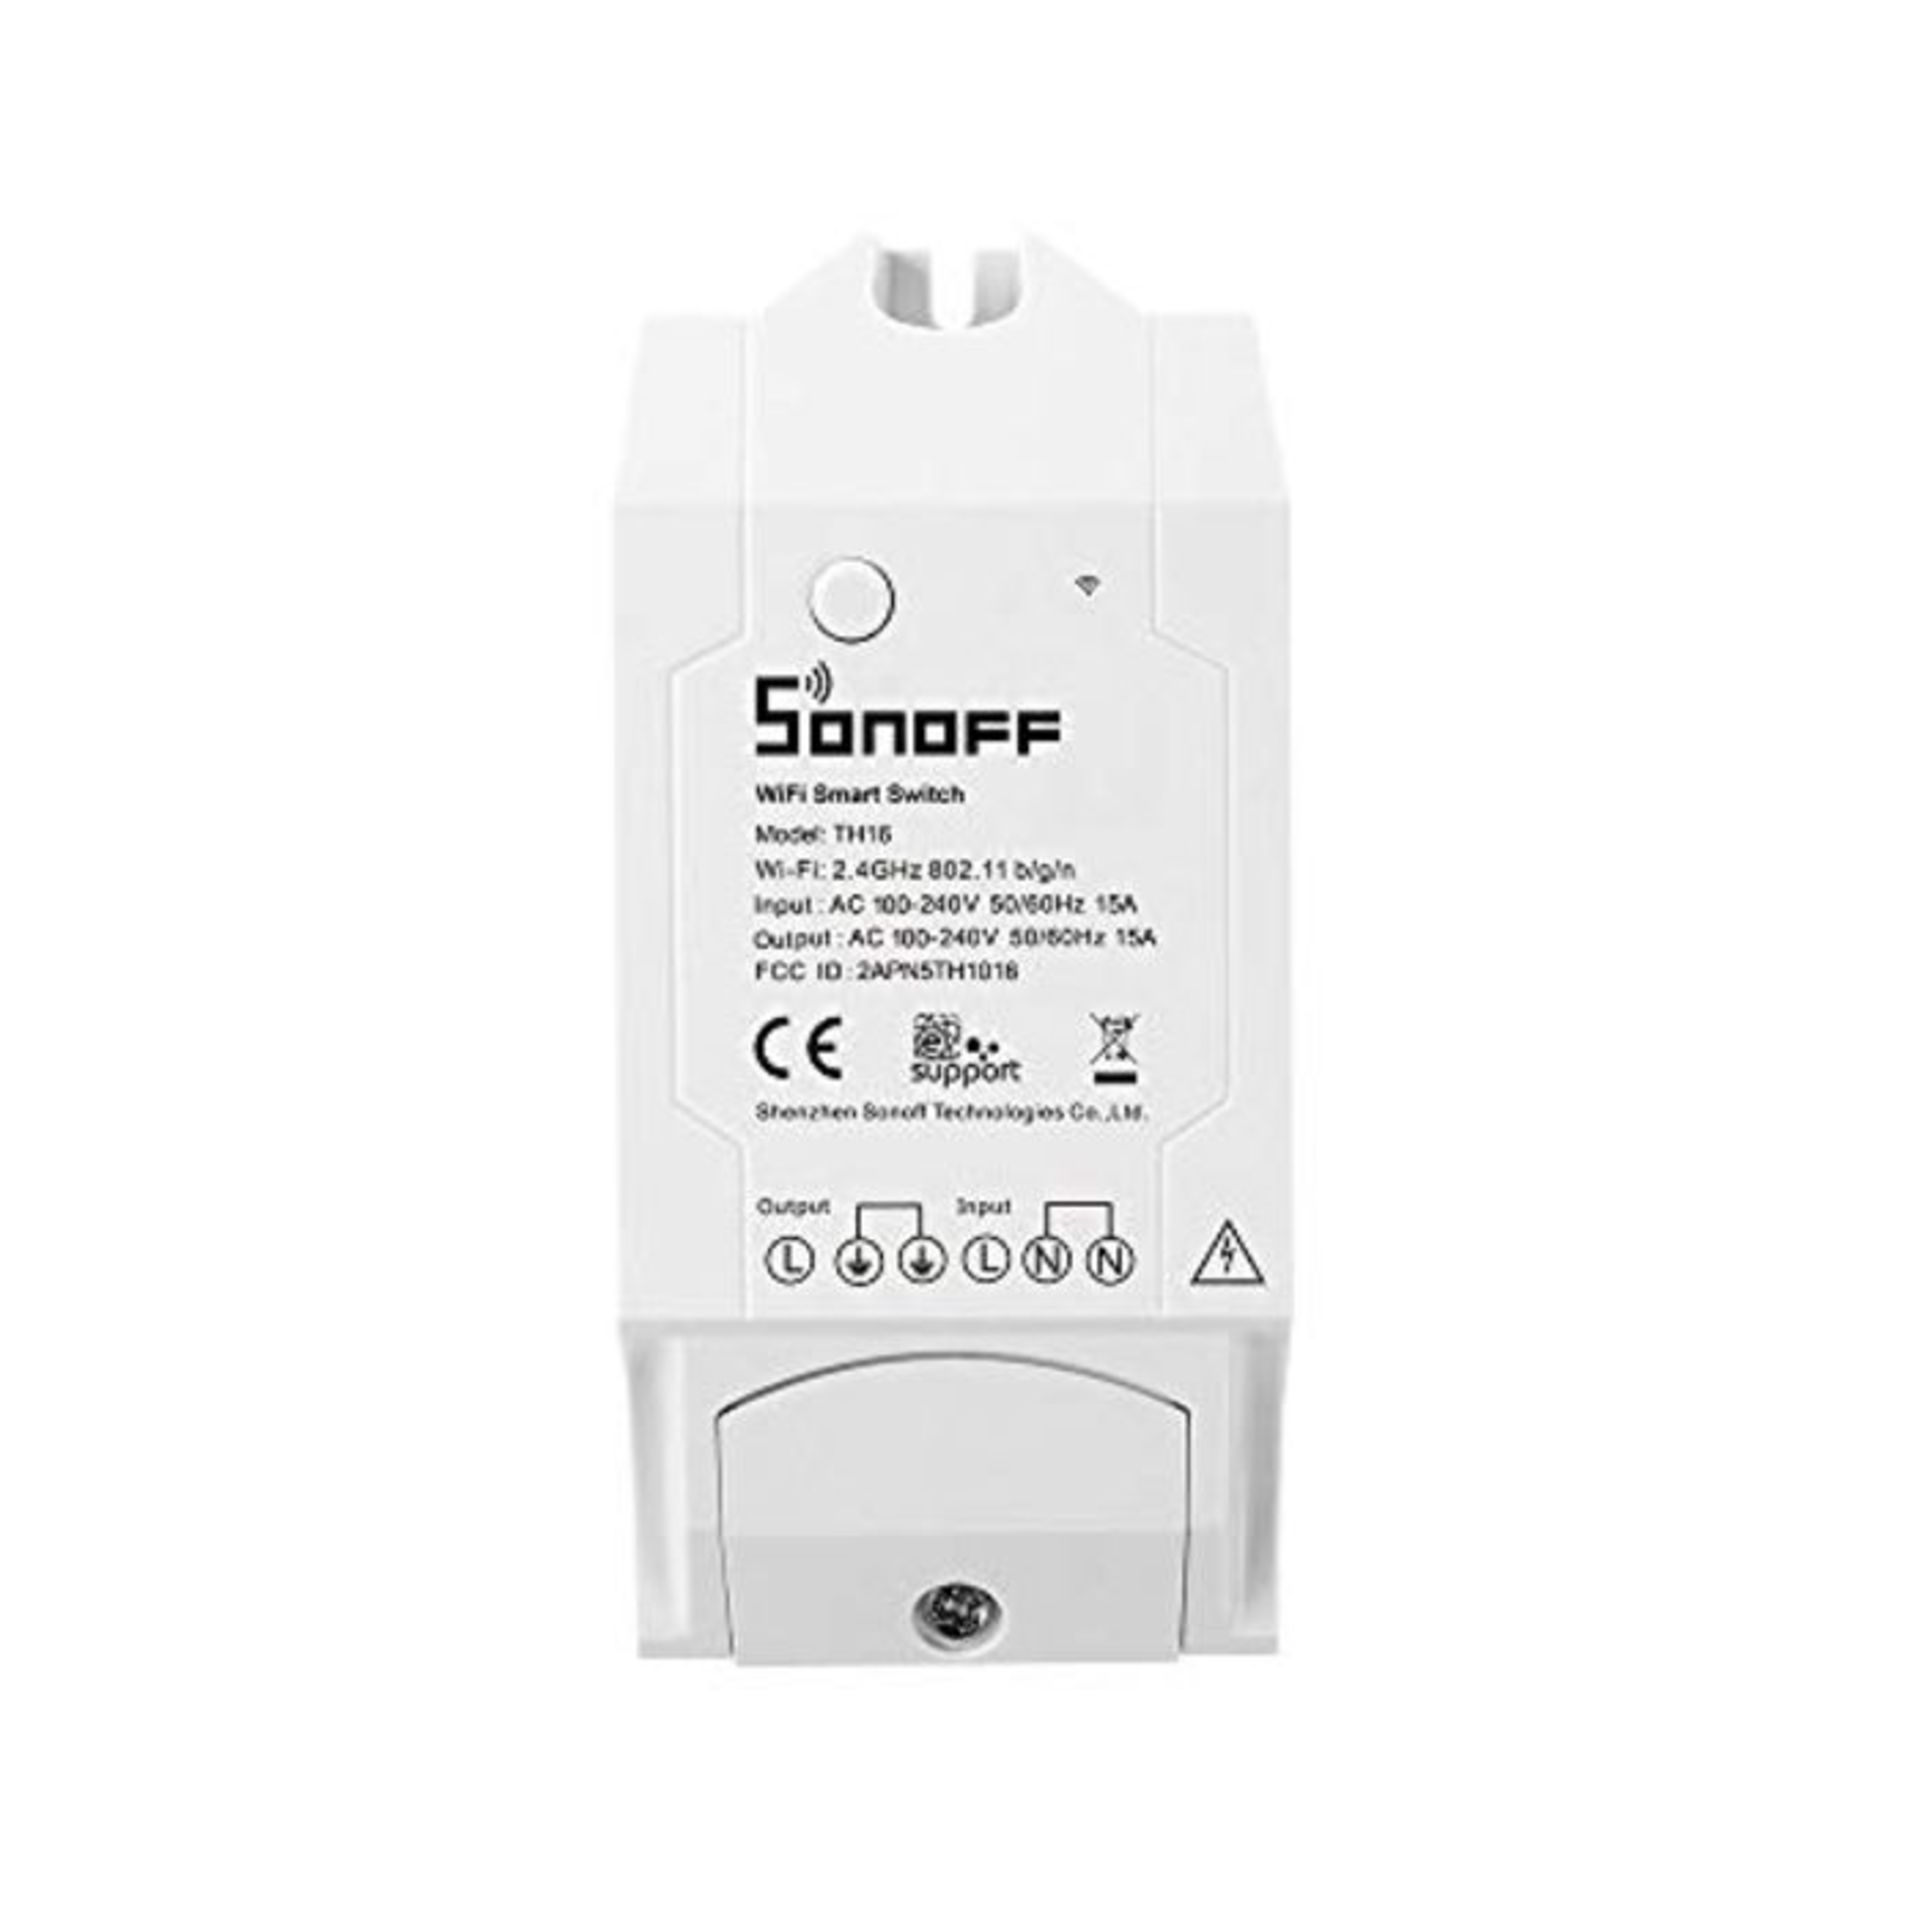 SONOFF TH16 15A Smart WiFi Switch Monitoring Temperature Humidity,Works with Amazon Al